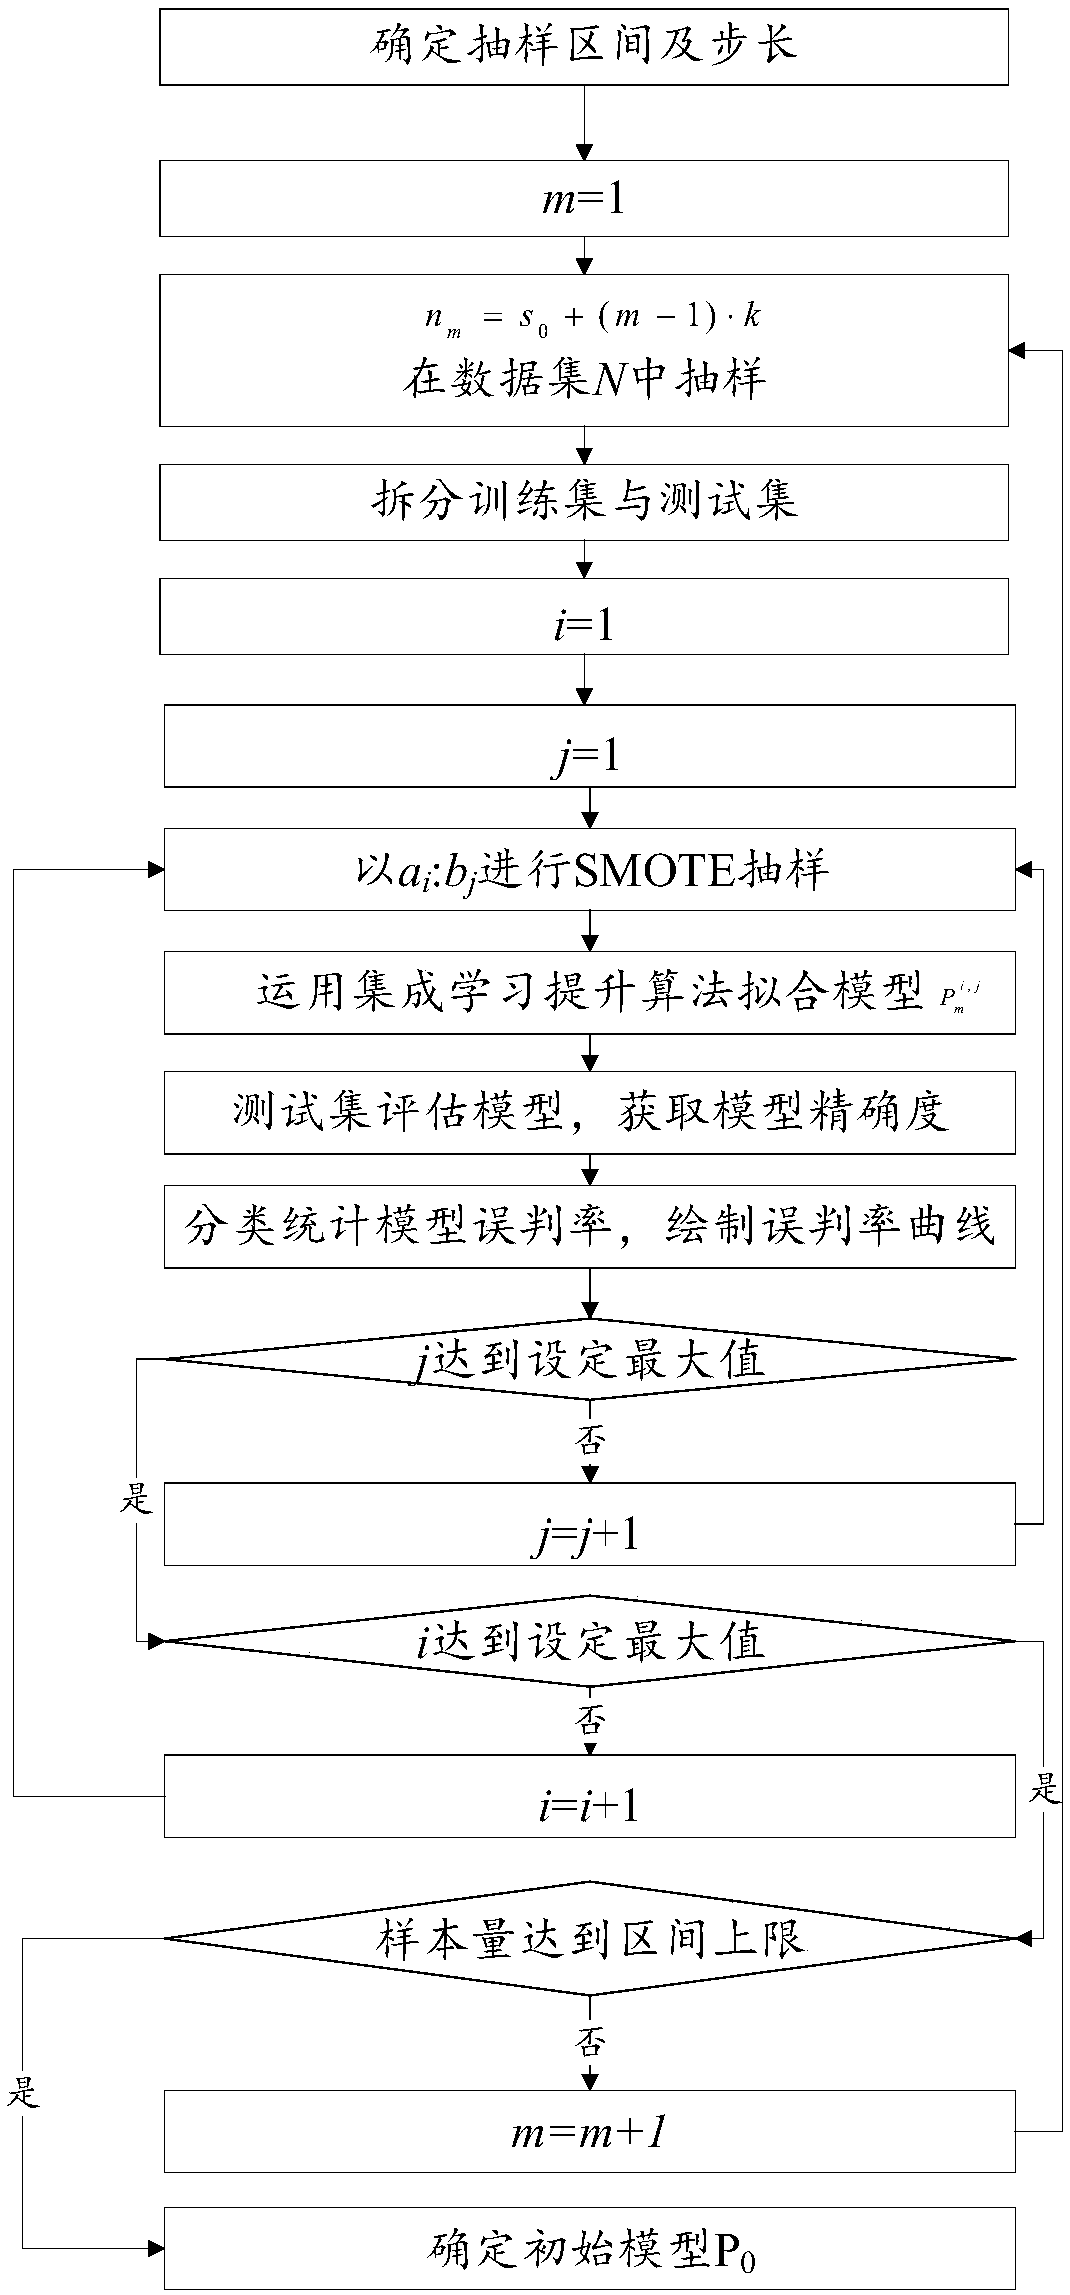 Method for enhancing traffic hazard personnel accident risk prediction precision